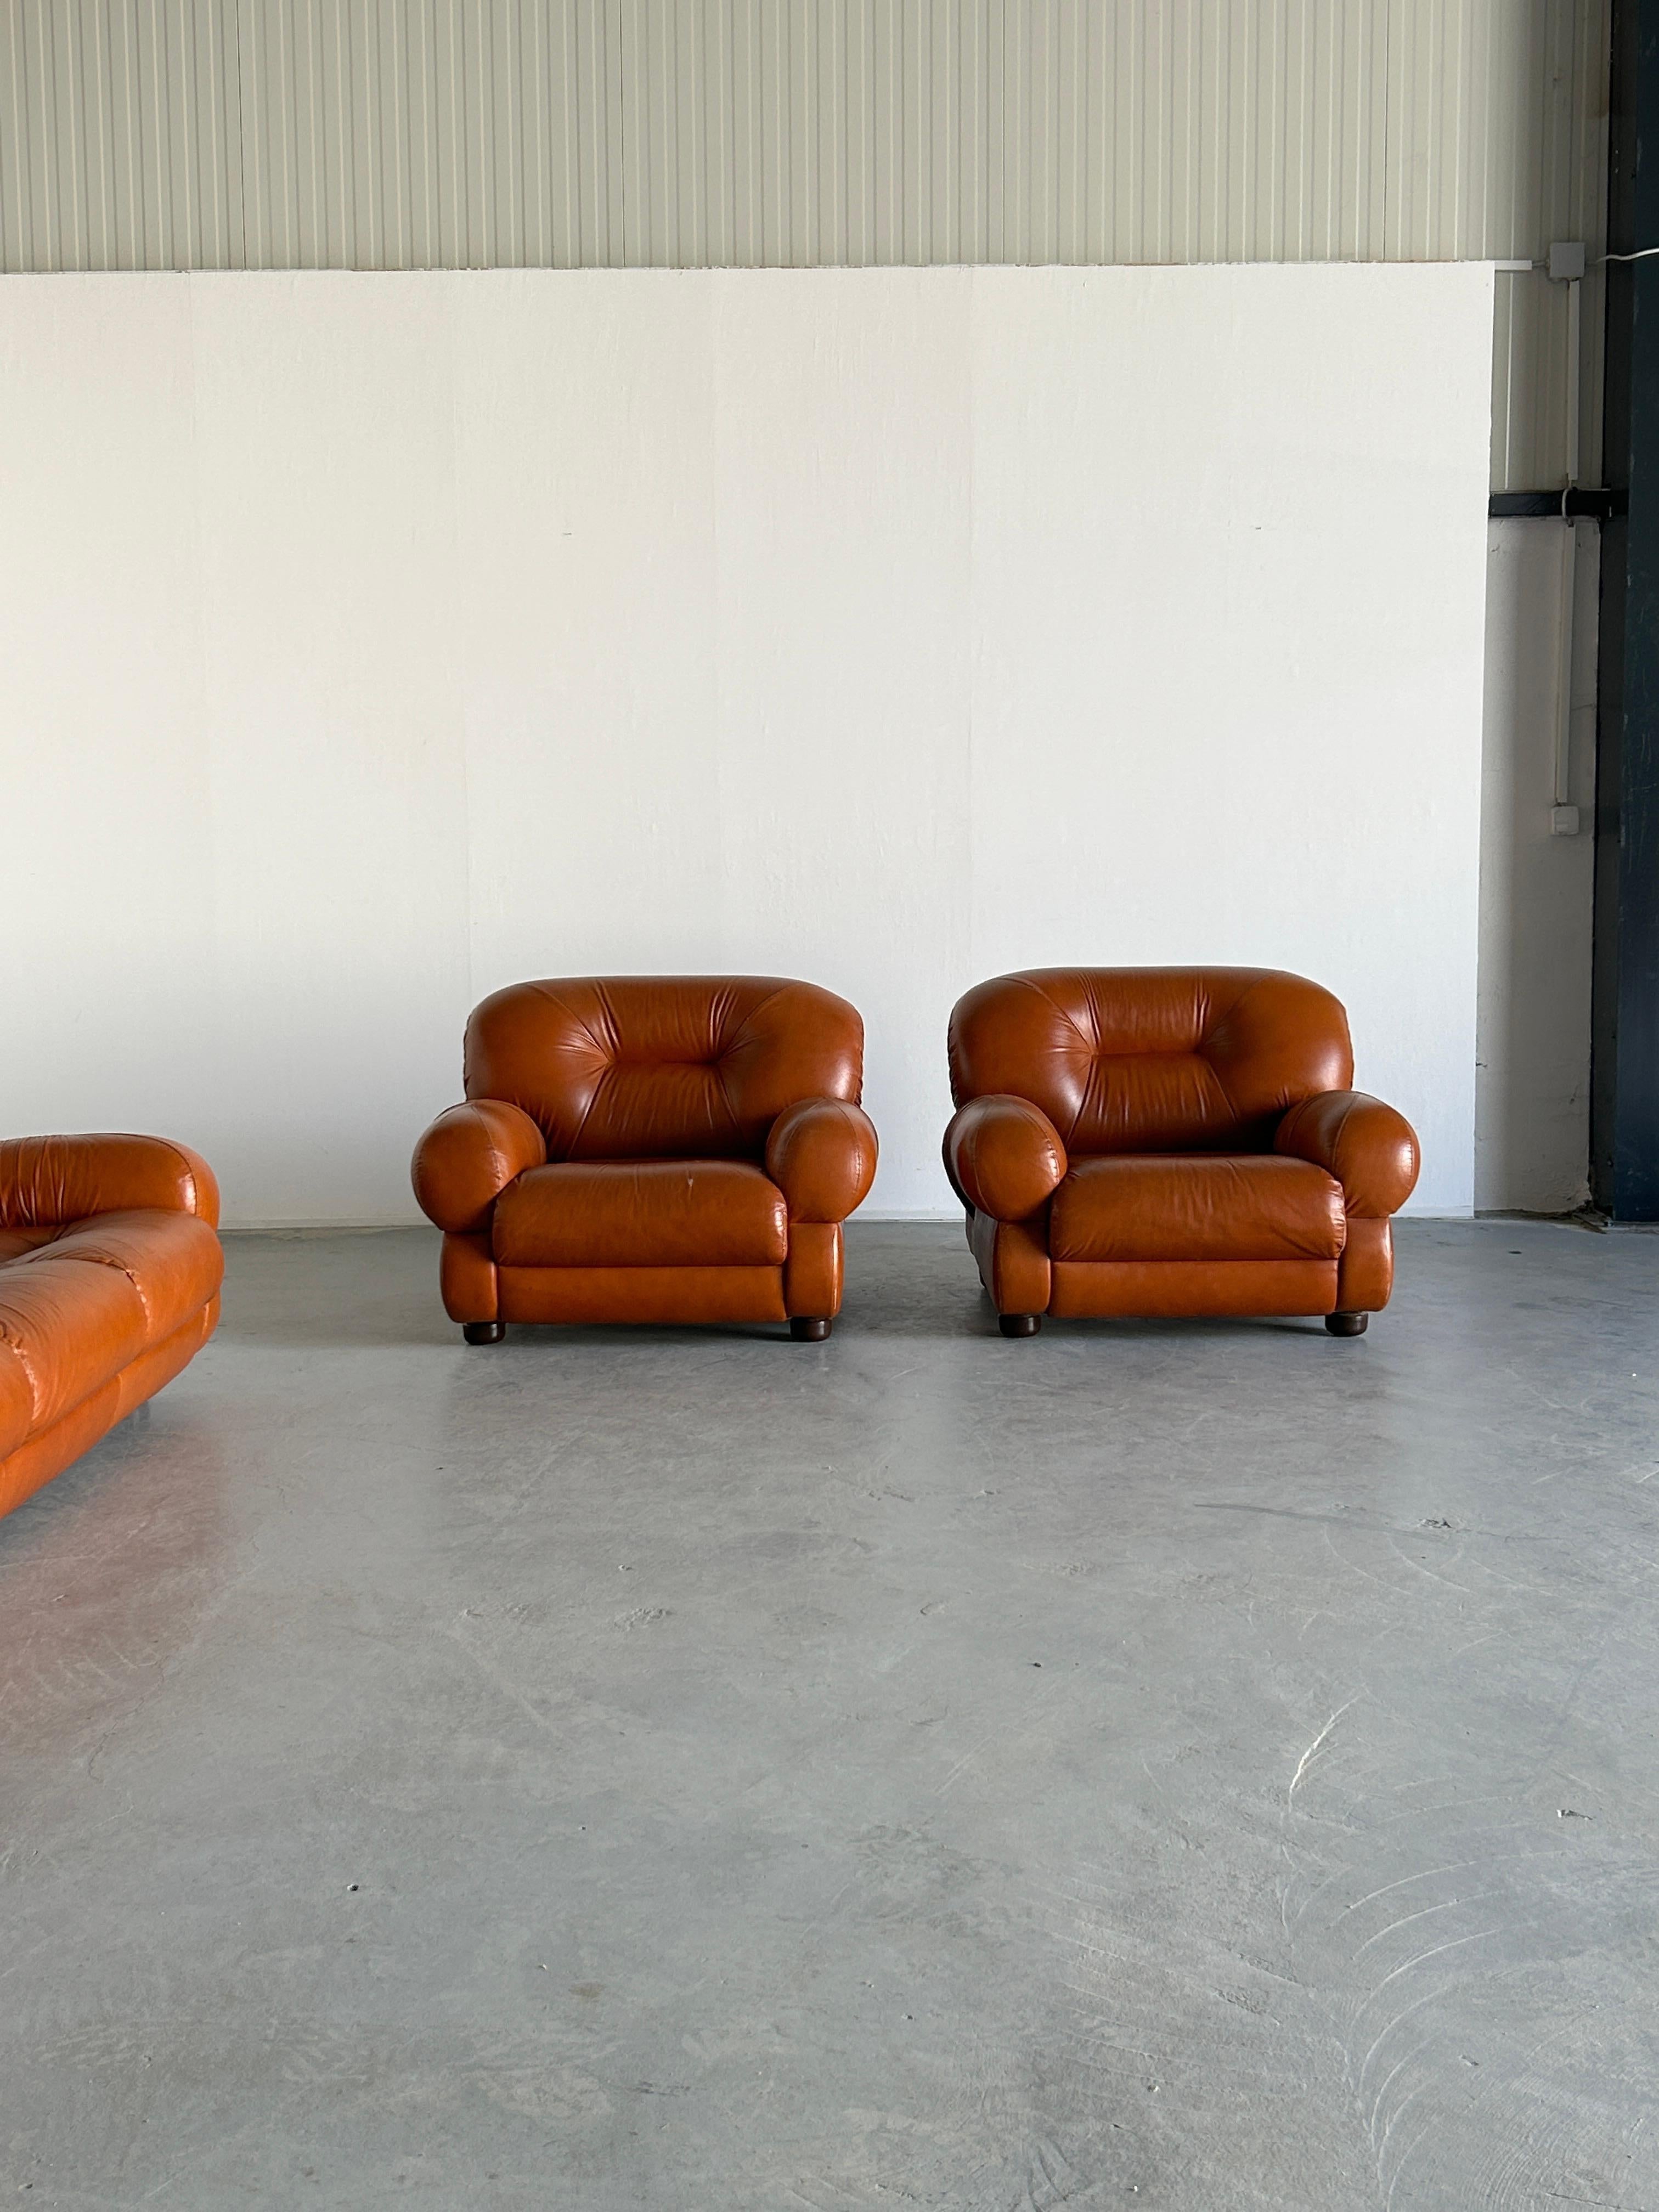 Vintage Italian Ruched Cognac Leather Mid-Century Modern Seating Set, 1970s For Sale 4